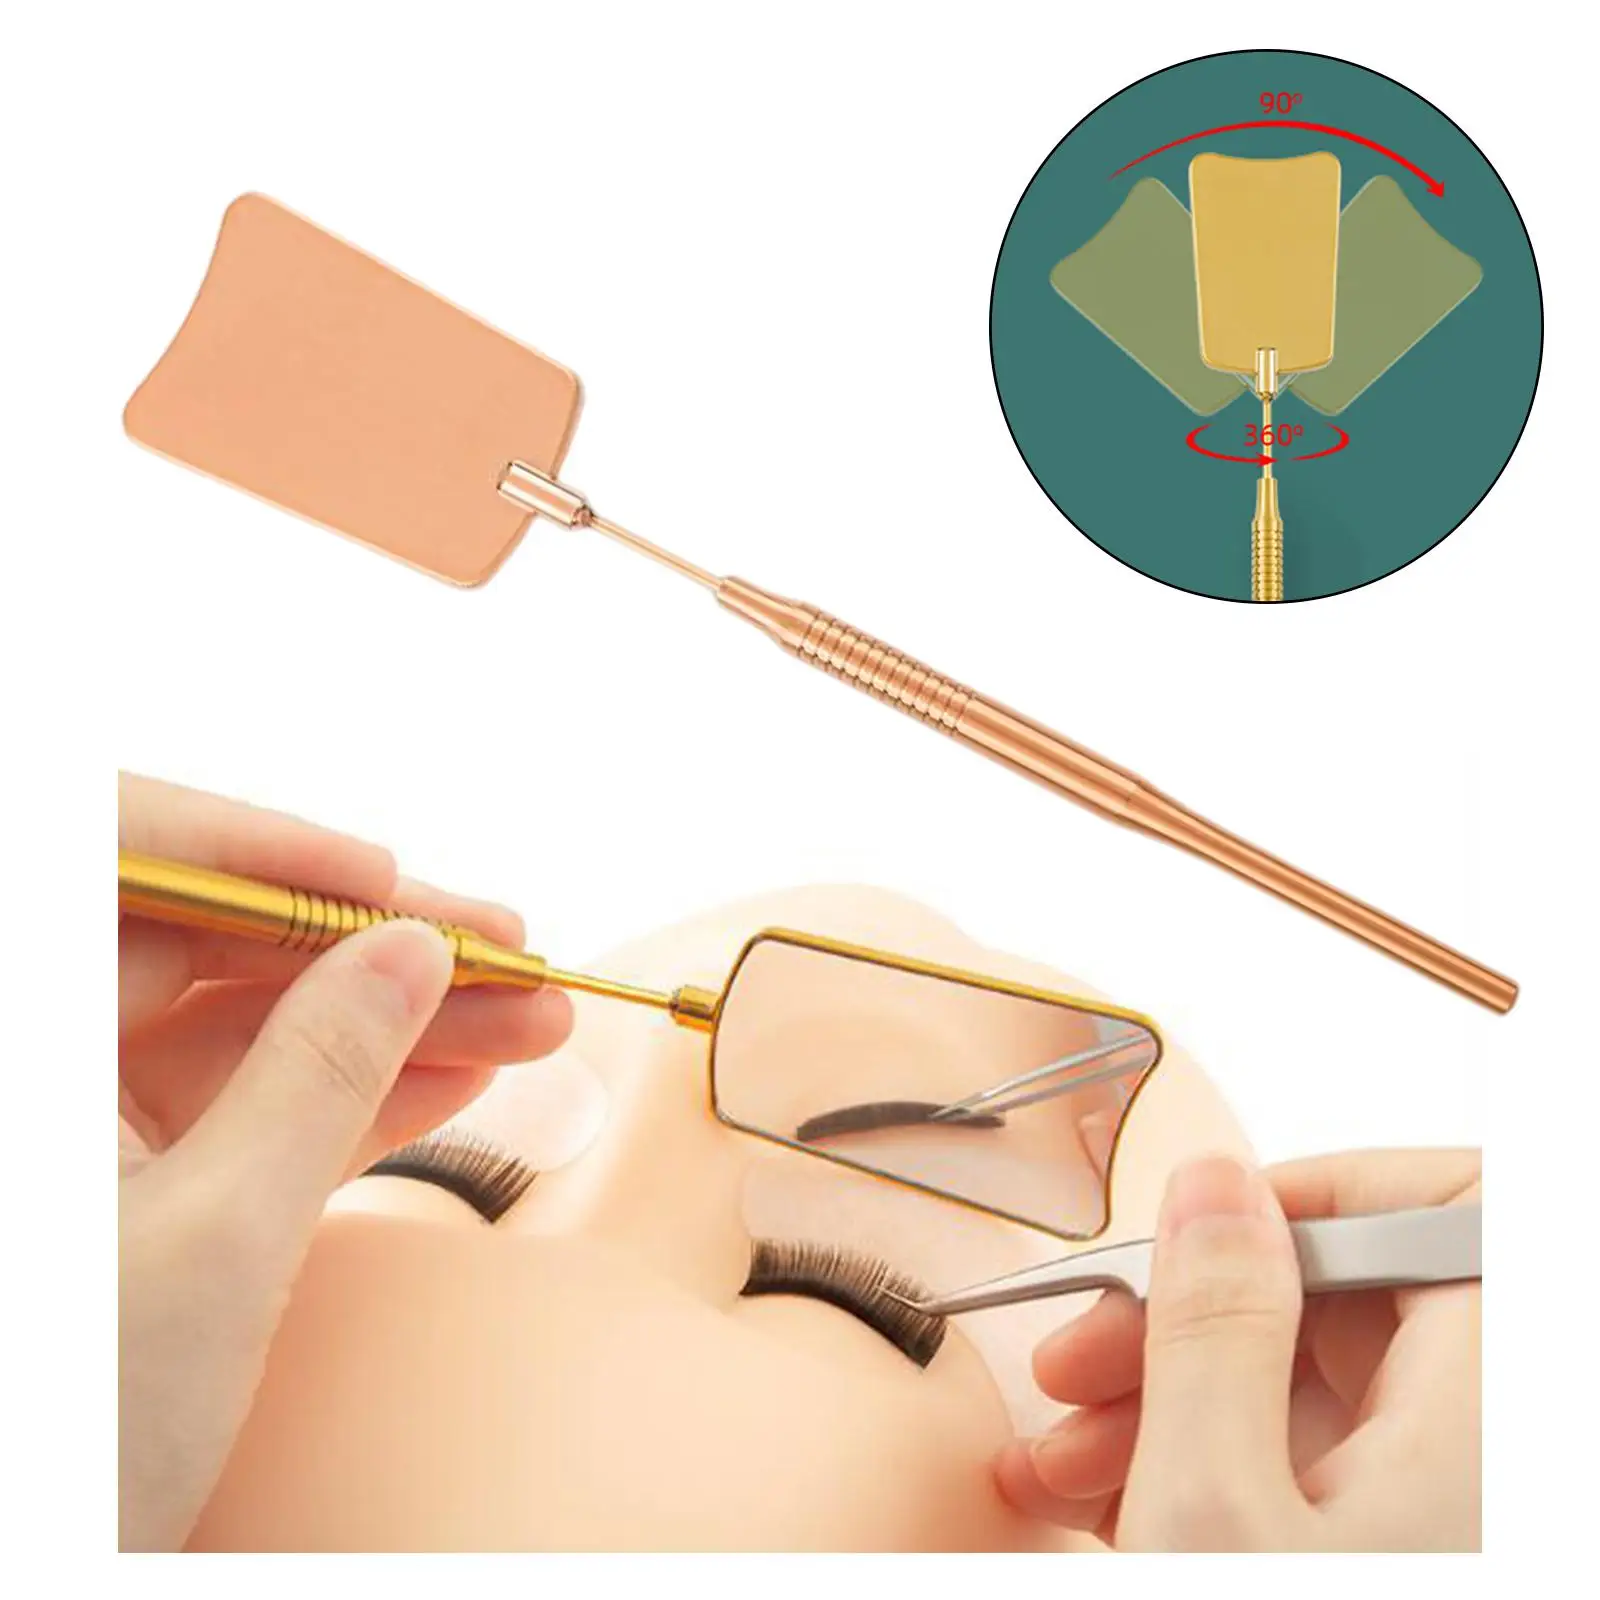 360 Rotatable Stainless Steel Handheld Beauty Eyelash Lash Check Mirror Great Assistant Wide View Field Accessories Durable